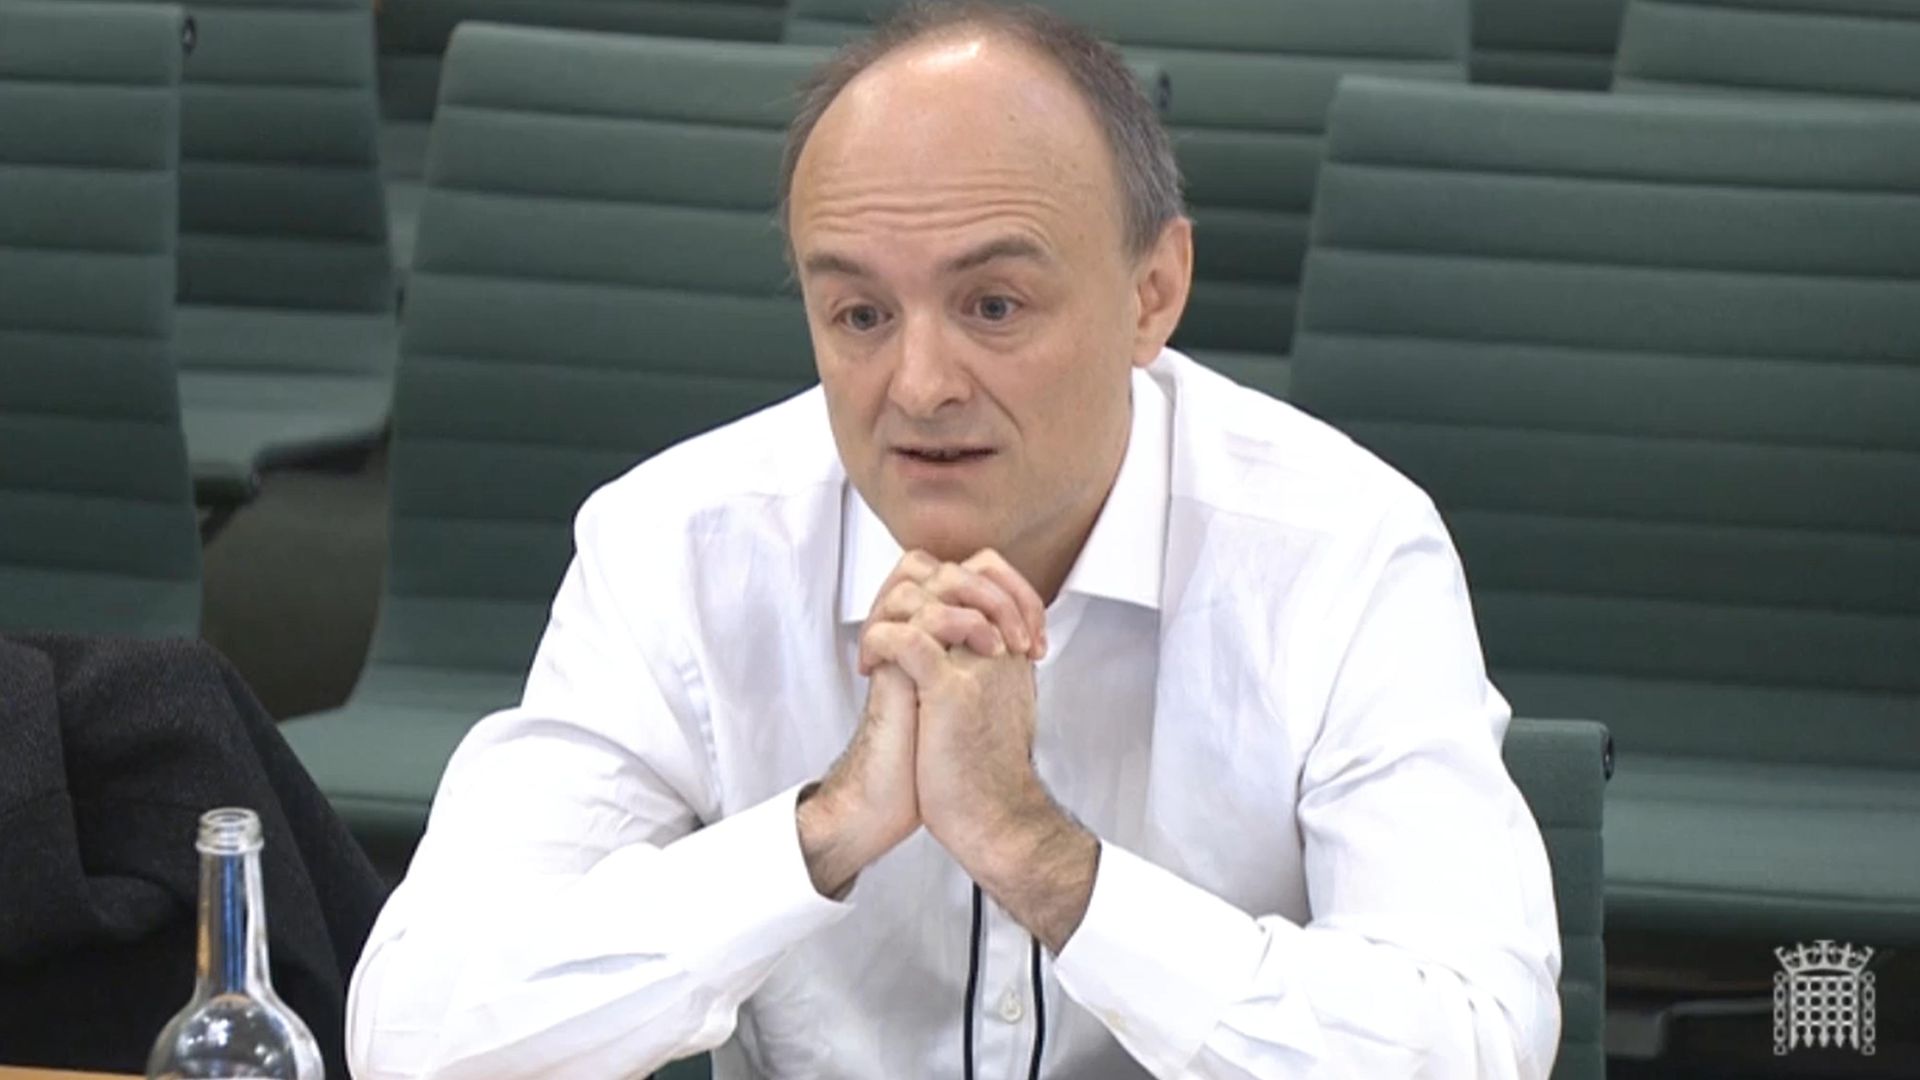 Dominic Cummings giving speaking at the Commons Science and Technology Committee - Credit: PA